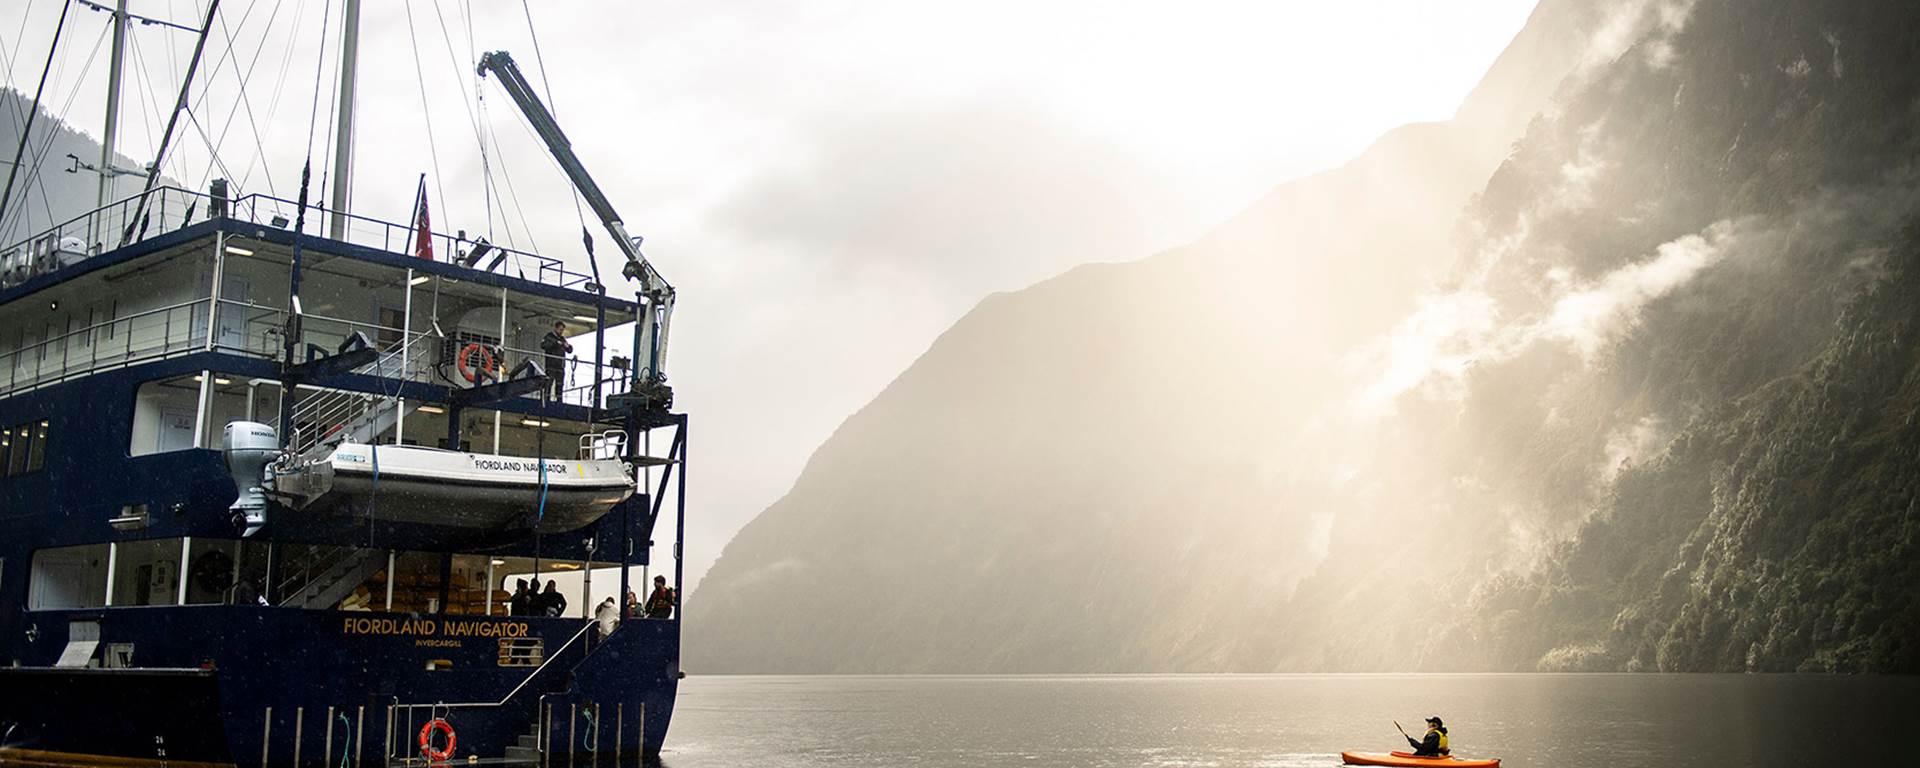 A kayaker floats near the Fiordland Navigator vessel on the water at Doubtful Sound